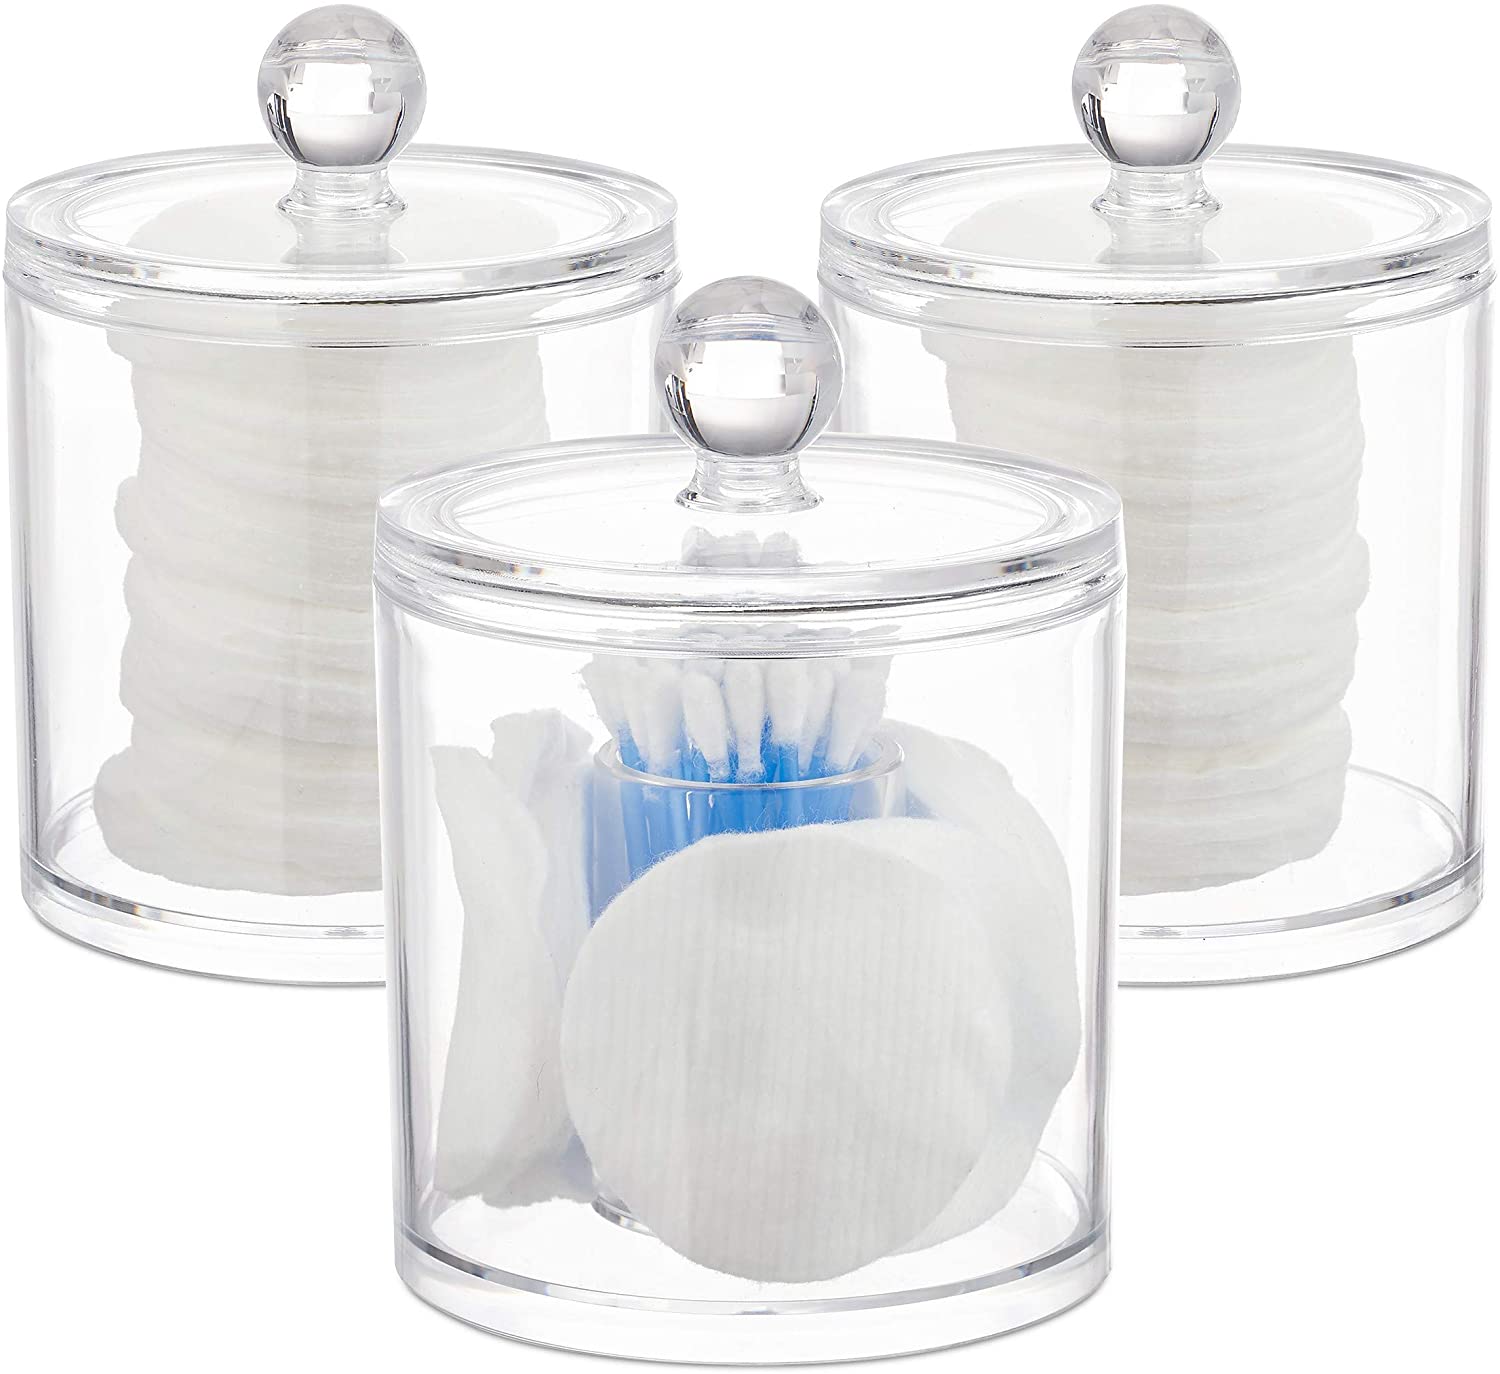 Relaxdays Cotton Buds Storage Set Of 3 Cotton Pad Holder With Lid Easy Care